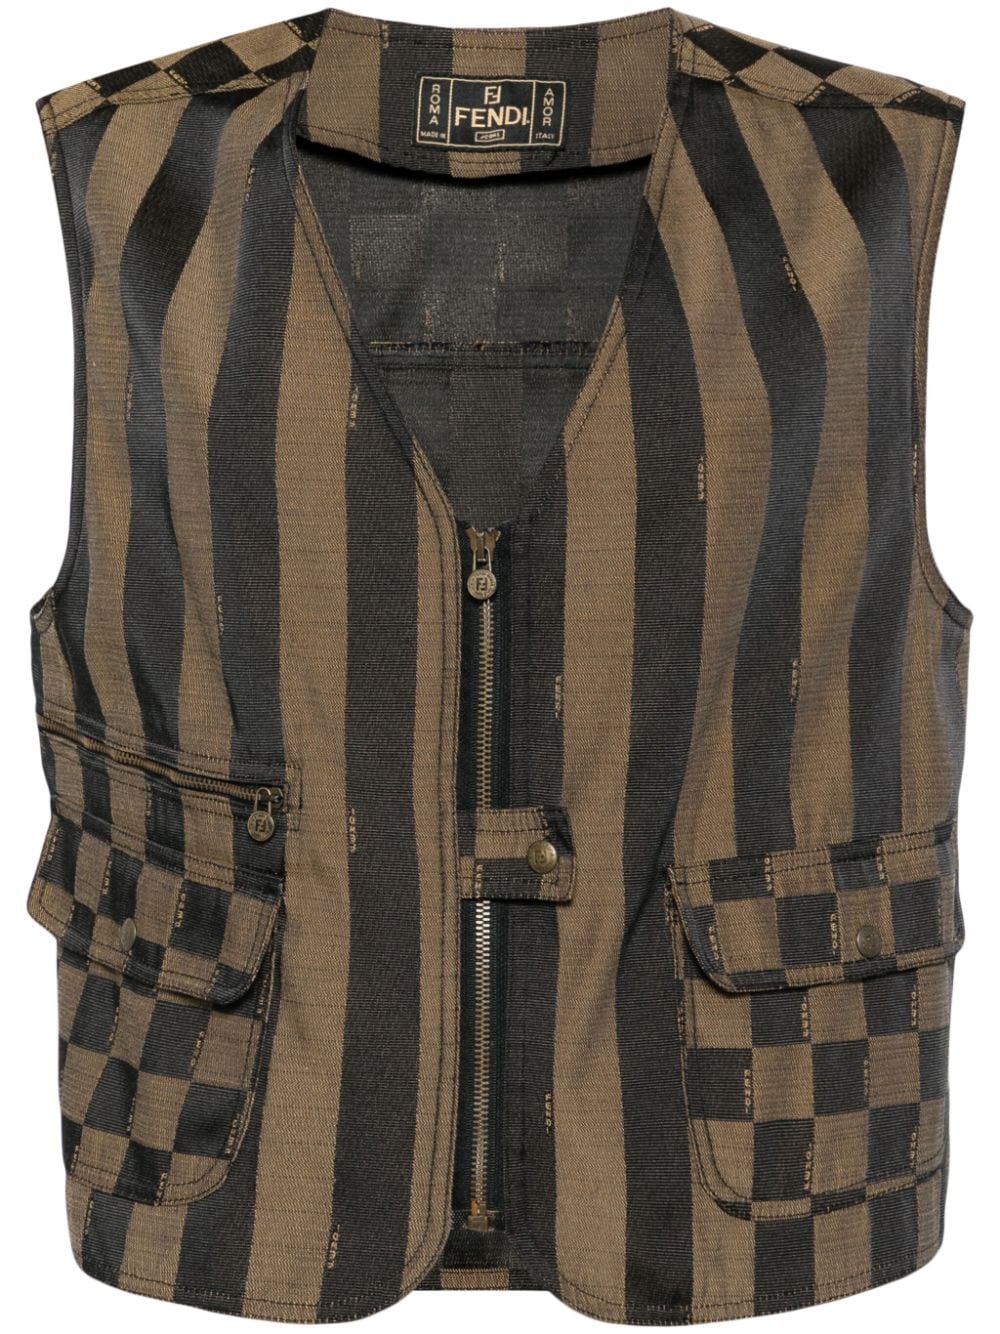 Pequin striped gilet